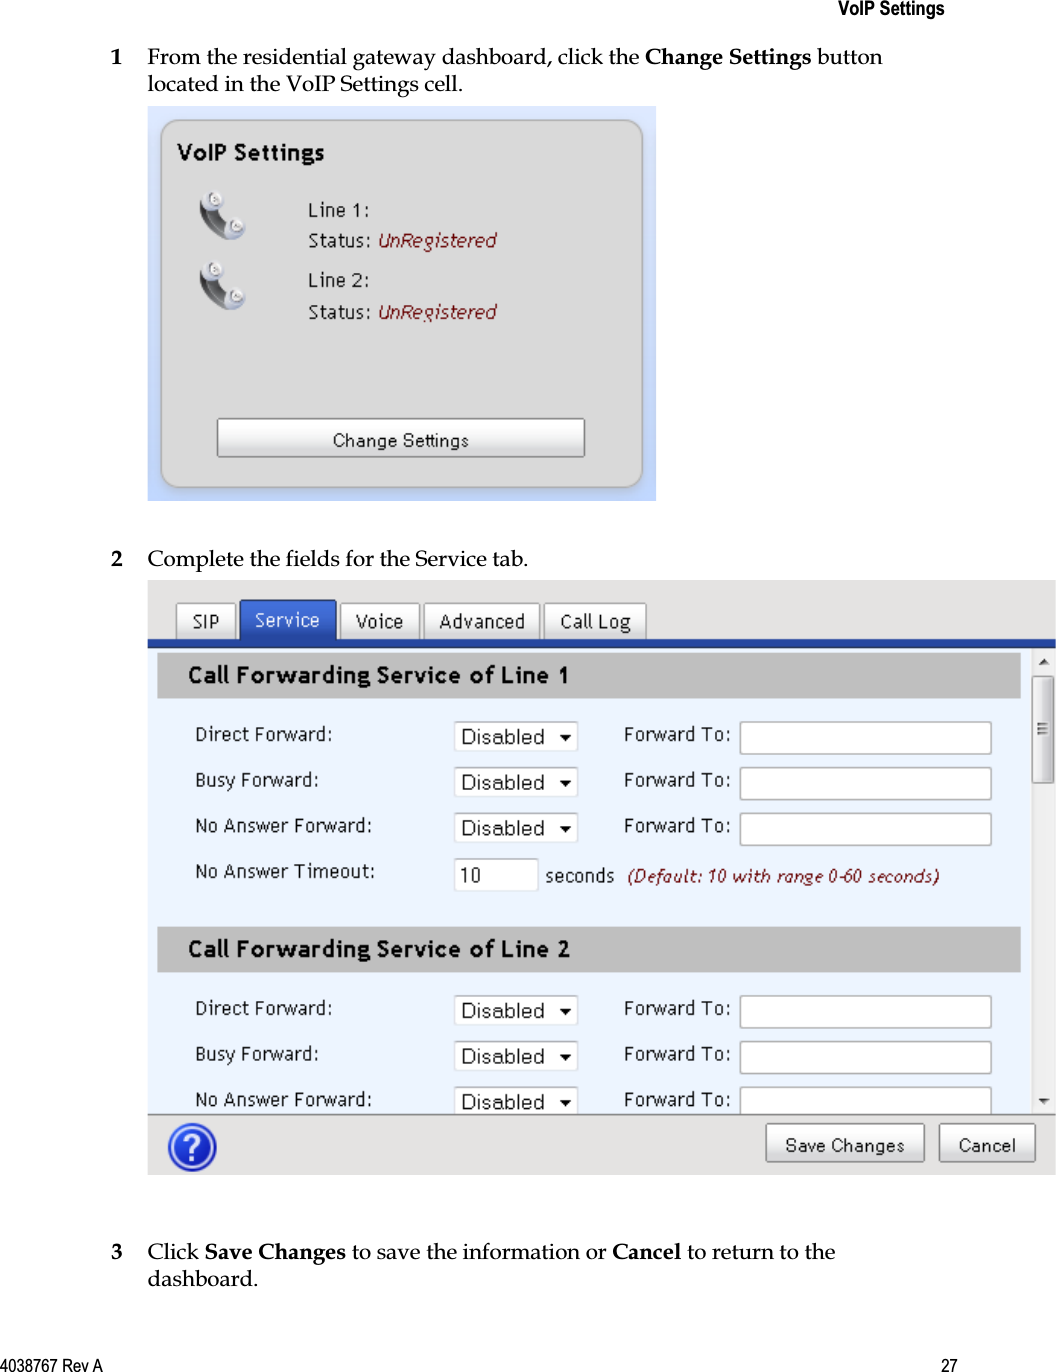    VoIP Settings  4038767 Rev A  27  1 From the residential gateway dashboard, click the Change Settings button located in the VoIP Settings cell.   2 Complete the fields for the Service tab.   3 Click Save Changes to save the information or Cancel to return to the dashboard.  